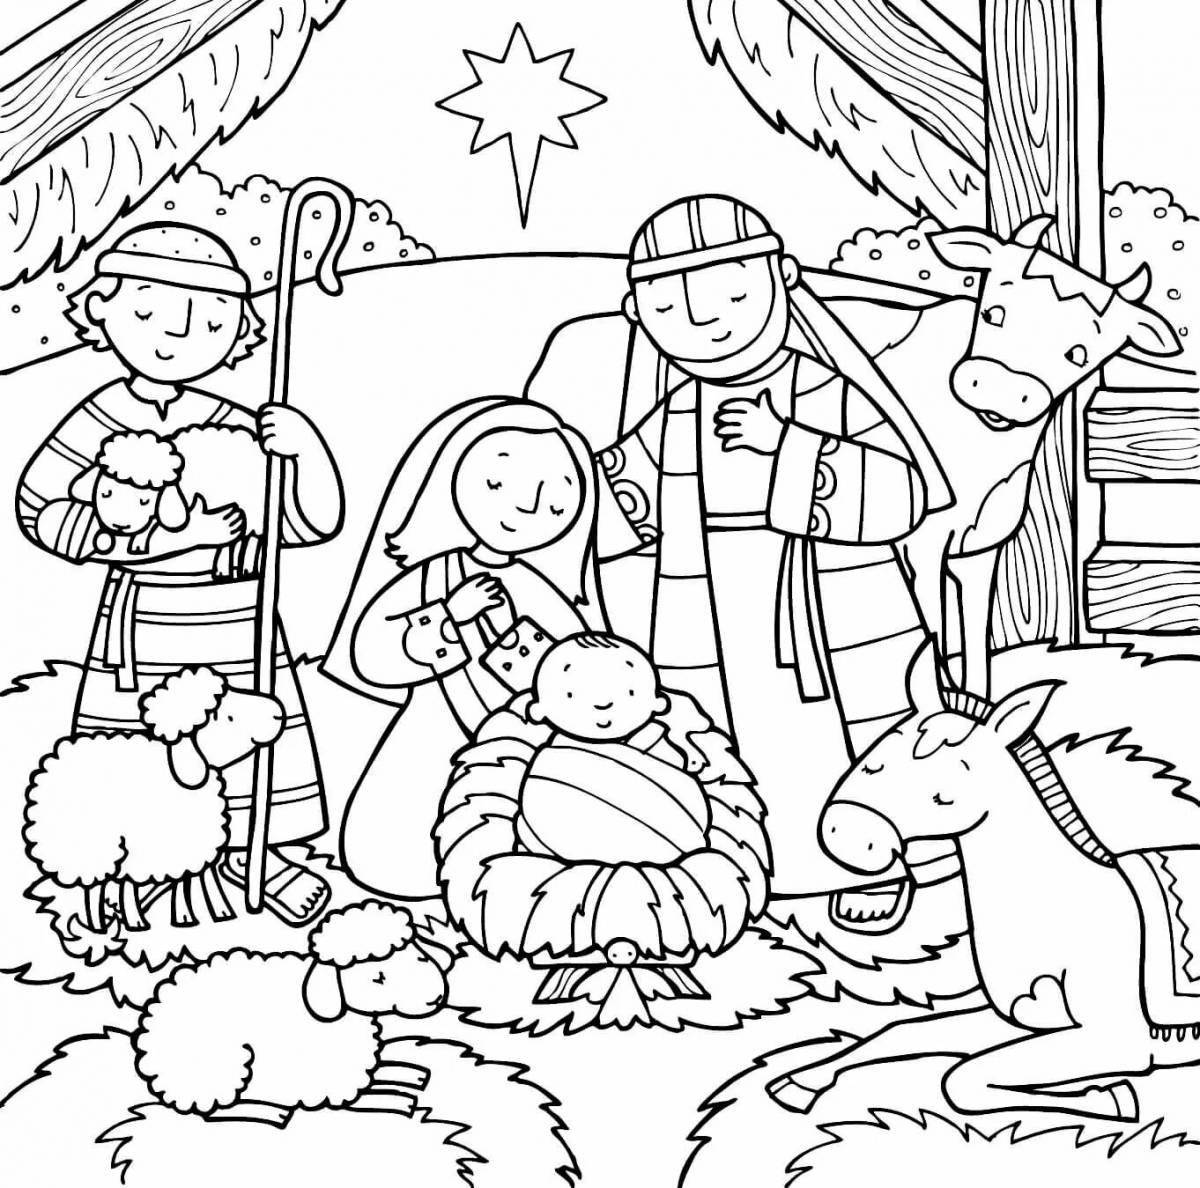 Exciting coloring for children's christmas